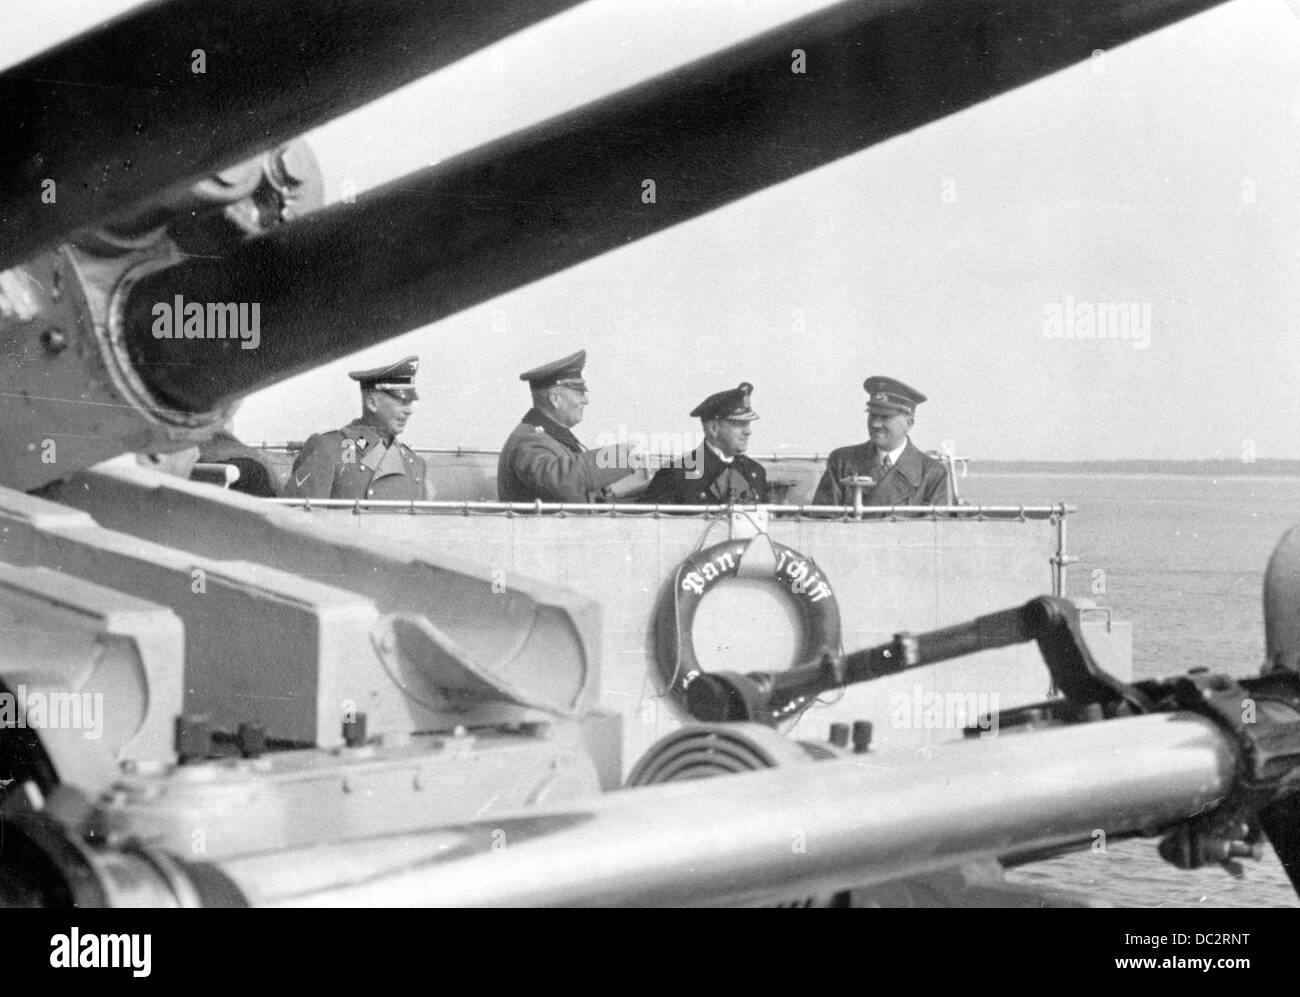 The Reich Chancellor Adolf Hitler is pictured on the battleship 'Deutschland', published on 23 March 1939. The Nazi Propaganda! on the back of the image reads: 'The Führer's trip to the Memelland on the battleship 'Deutschland'. The Führer on the bridge of the battleship 'Deutschland' accompanied by Admiral Dr.h.c. Erich Raeder (2-r), General Wilhelm Keitel (3-r), and Reich Minister Dr. Hans Heinrich Lammers (l) on a trip along the Memelland coast.' Fotoarchiv für Zeitgeschichte Stock Photo